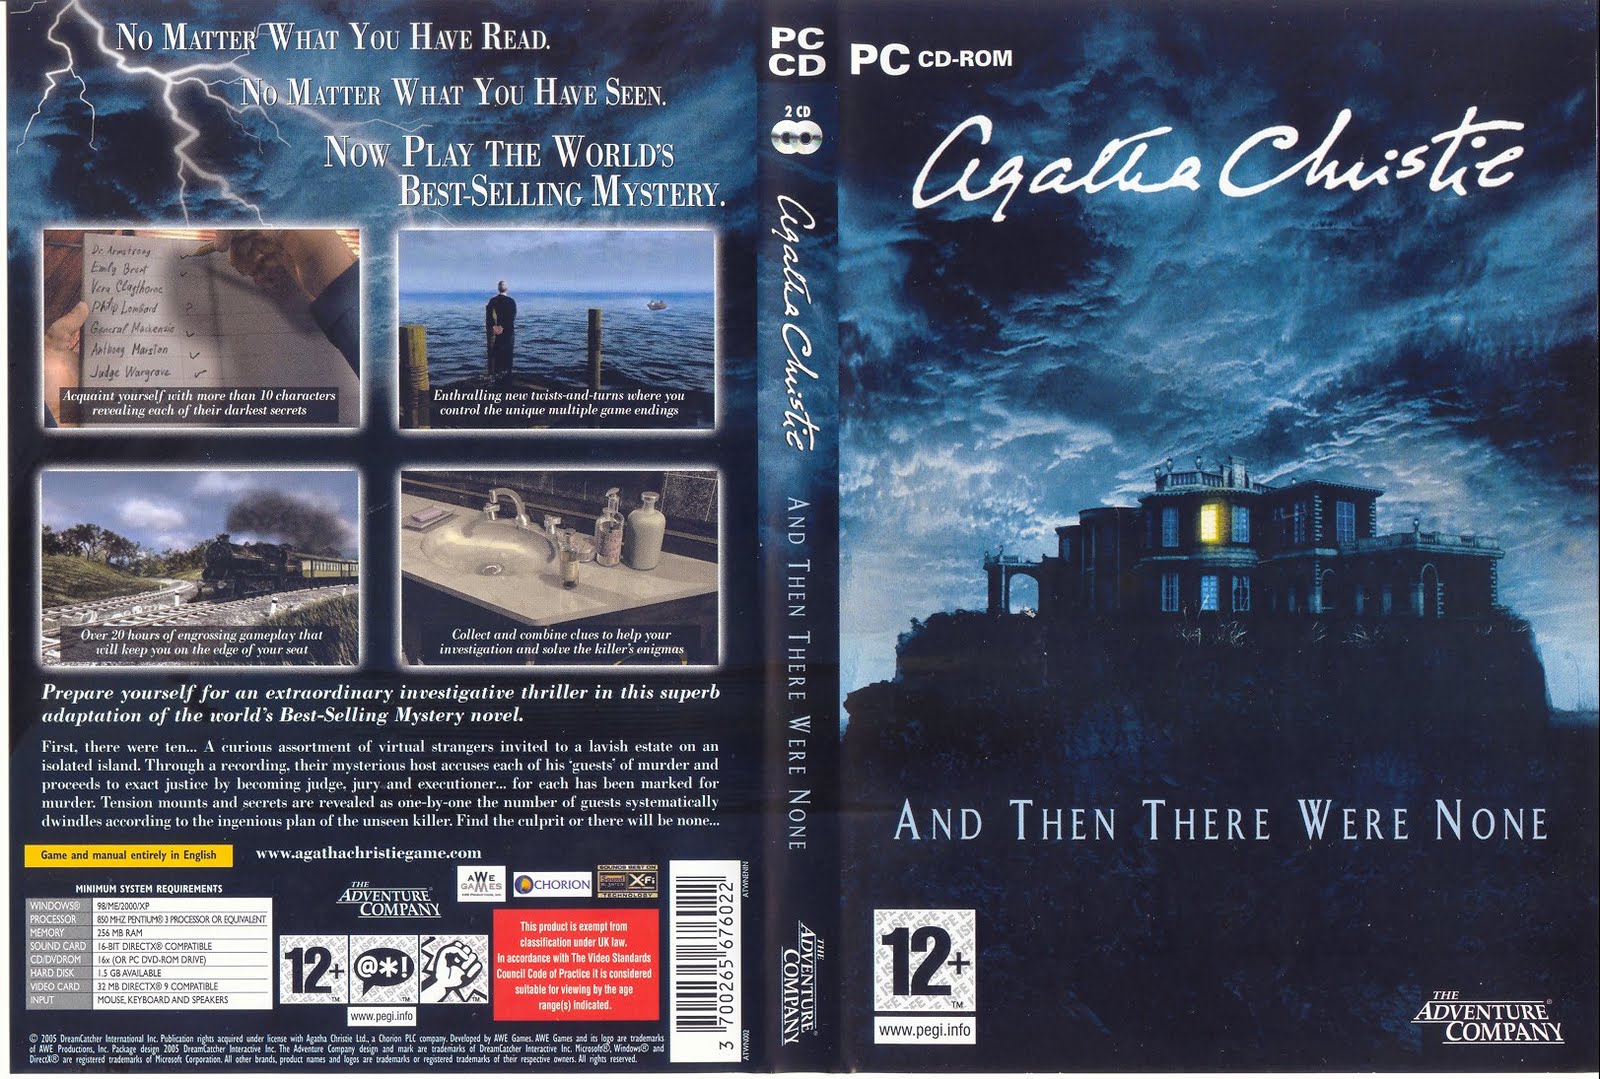 Agatha Christie: And Then There Were None ( 2005 ) - Mười người da đen nhỏ Agatha_Christie__And_Then_There_Were_None+Pc